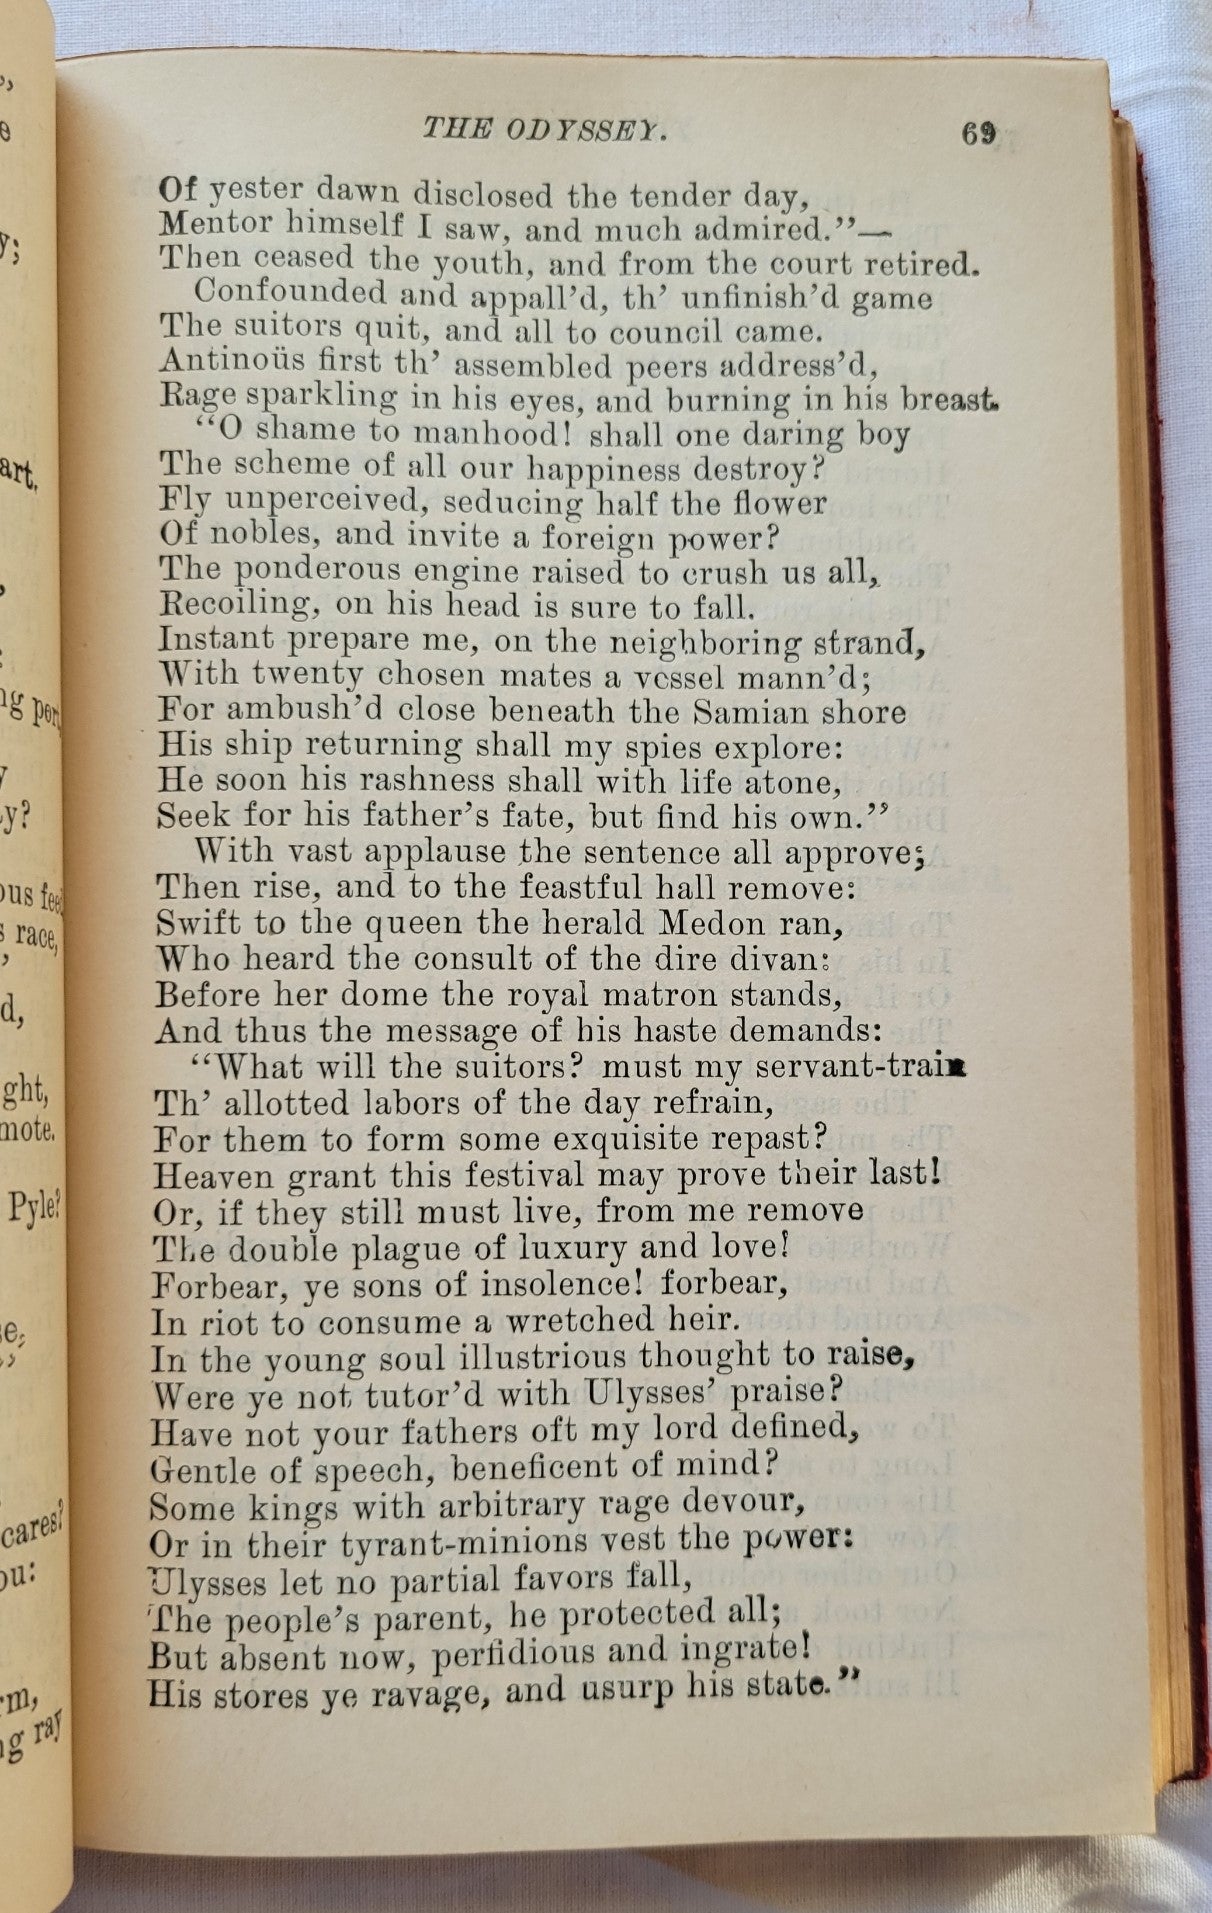 Antique book for sale, Homer's ancient Greek epic, The Odyssey translated by Alexander Pope, published by A. L. Burt Company (before 1932), with notes from Rev. Theodore Alois Buckley M.A. View of page 69.